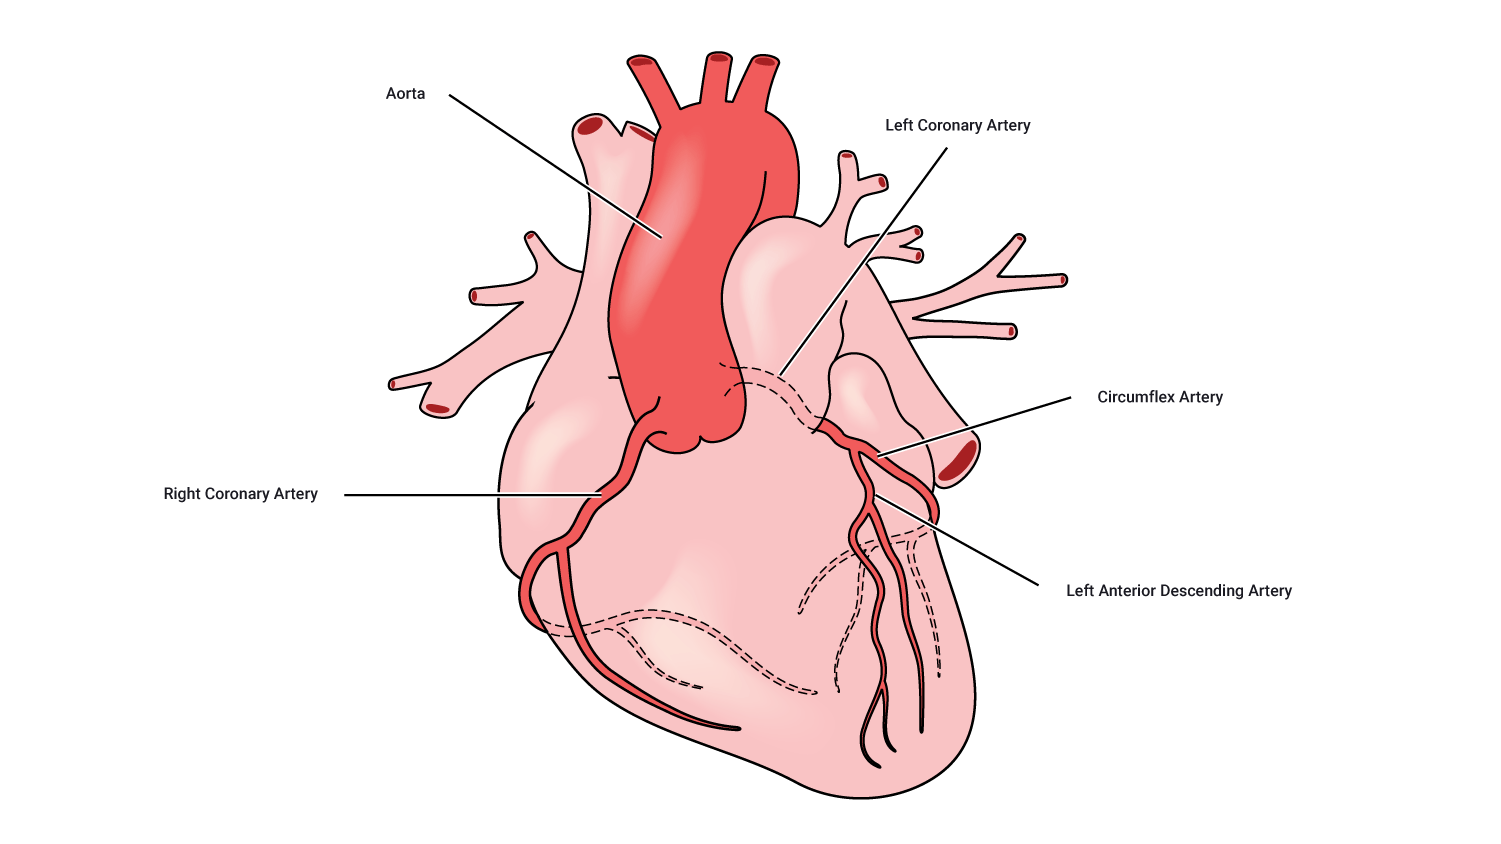 Image of main blood supply to the heart